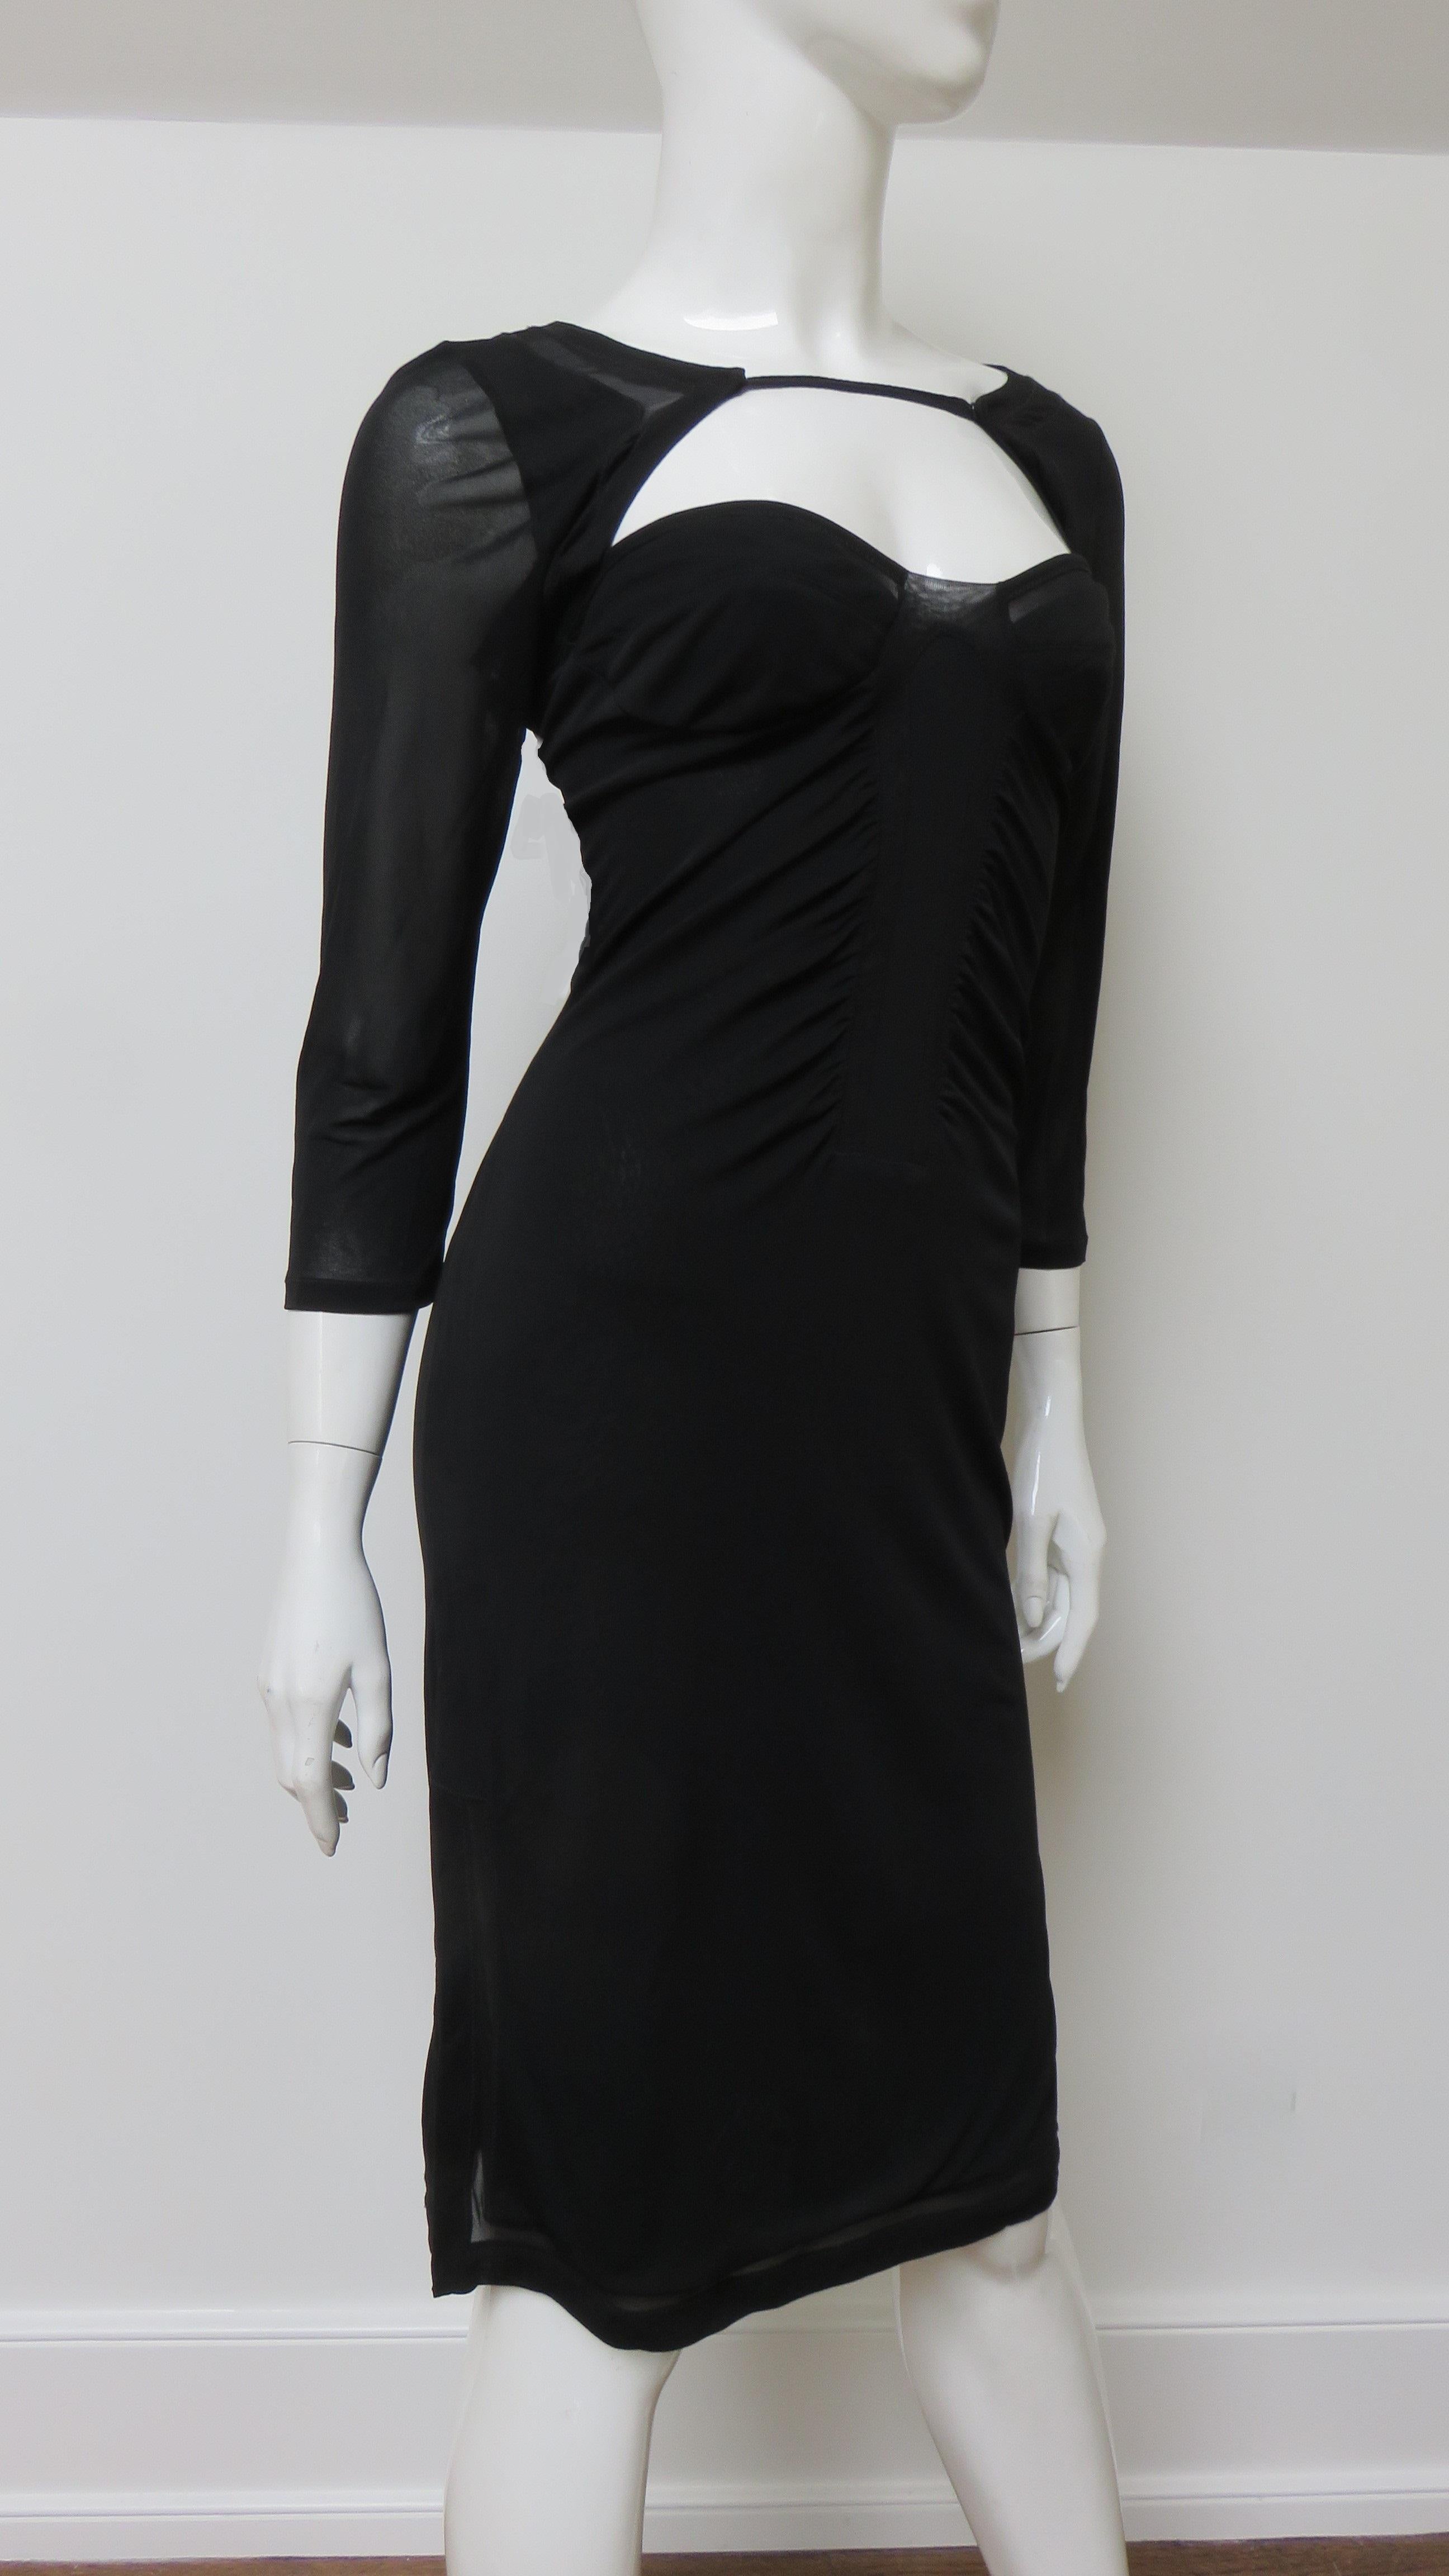 Tom Ford For Gucci Dress with Cut outs For Sale 1